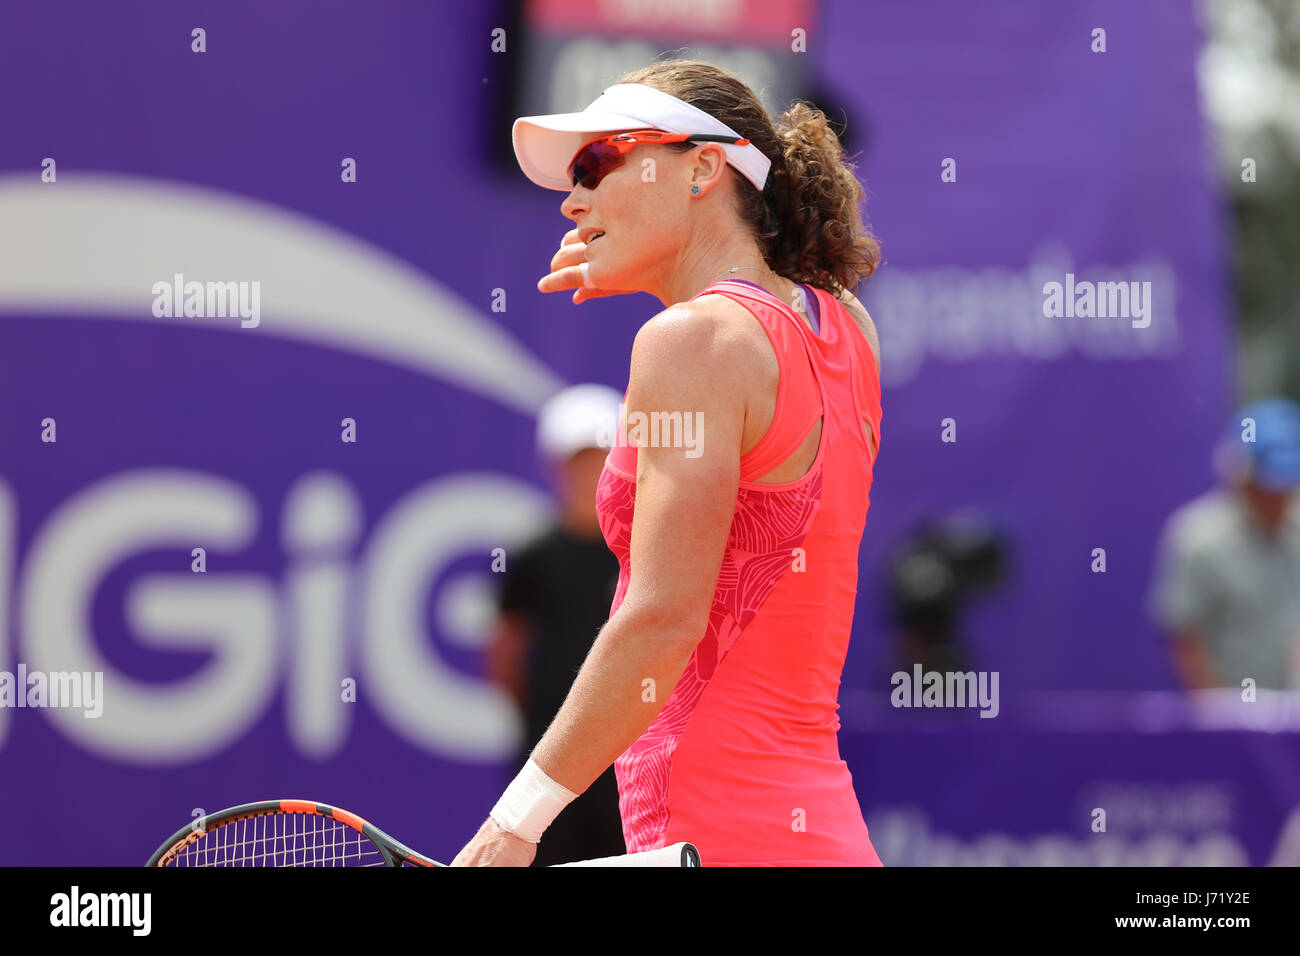 Strasbourg, France. 23rd May, 2017. Australian tennis player Samantha Stosur is in action during her match in the 2nd round of the WTA tennis Internationaux of Strasbourg vs American player Madison Brengle on May 23, 2017 in Strasbourg, France - Credit: Yan Lerval/Alamy Live News Stock Photo